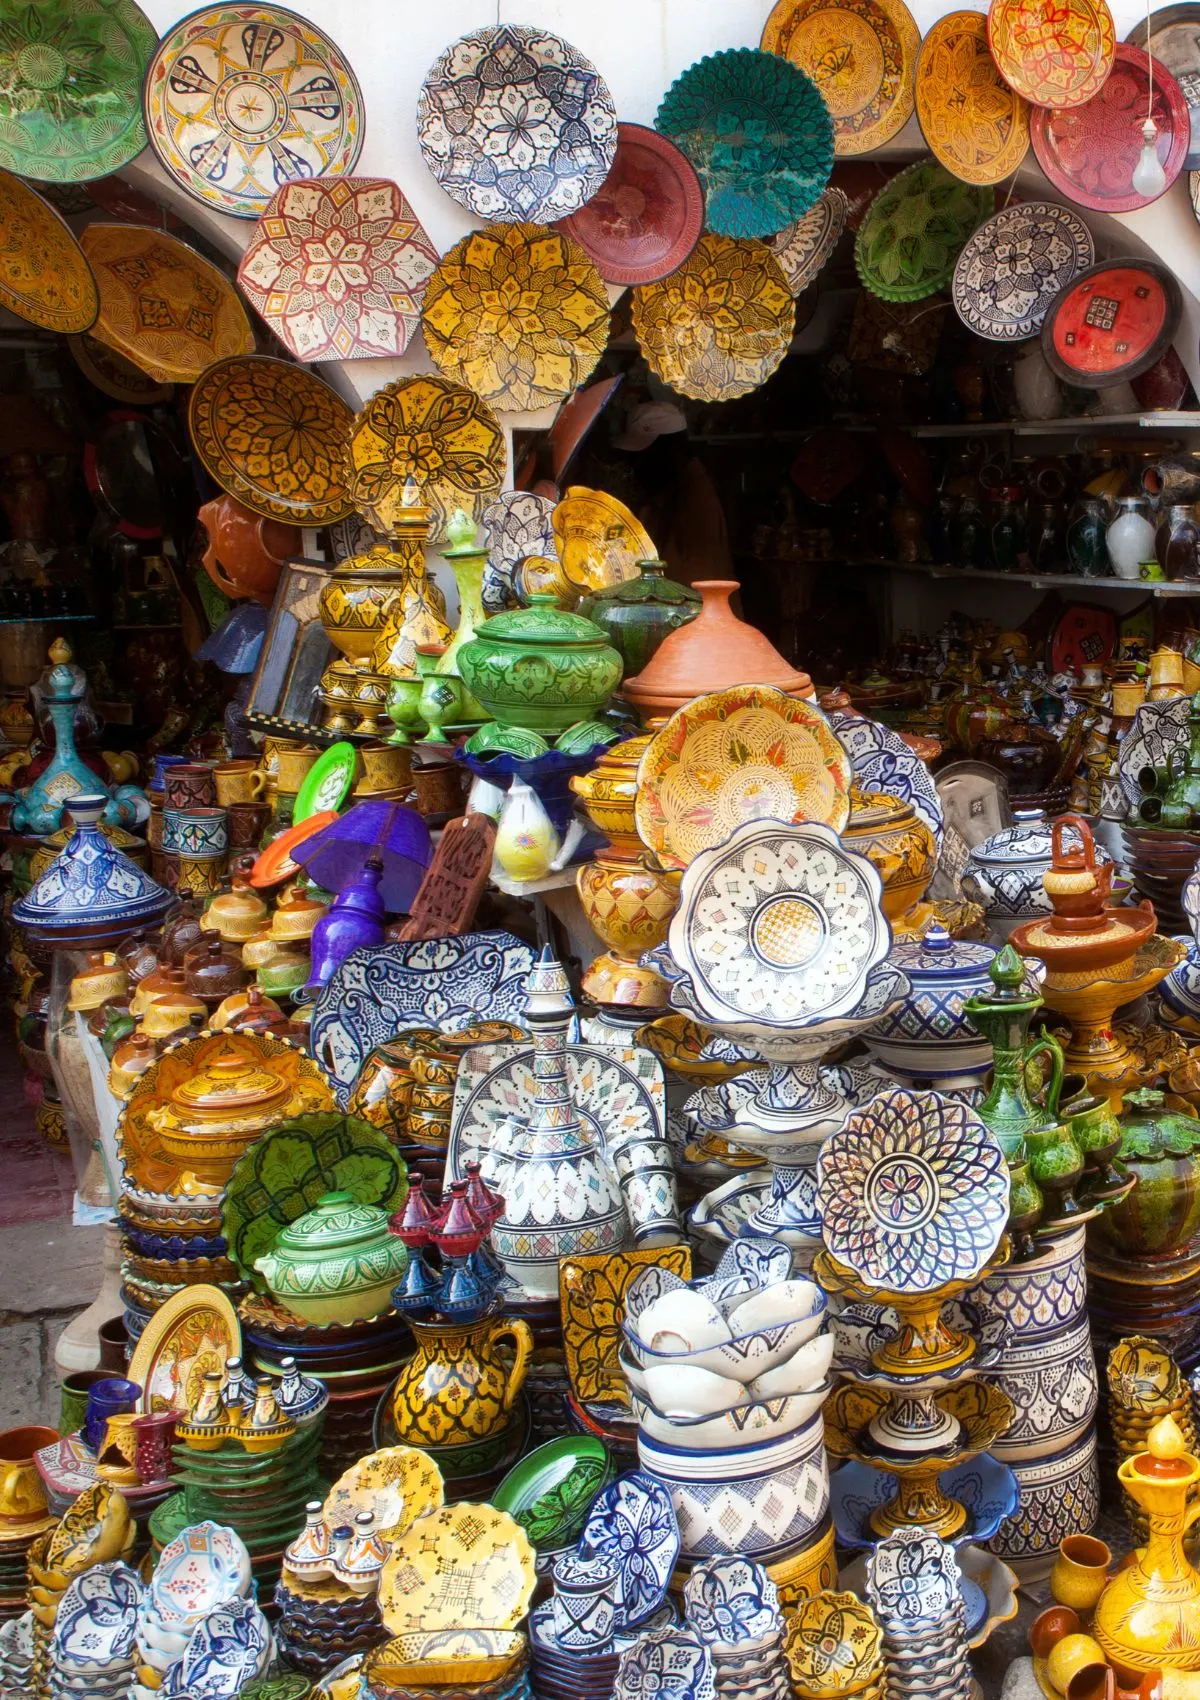 Colourful souvenirs in the form of traditional Moroccan pottery